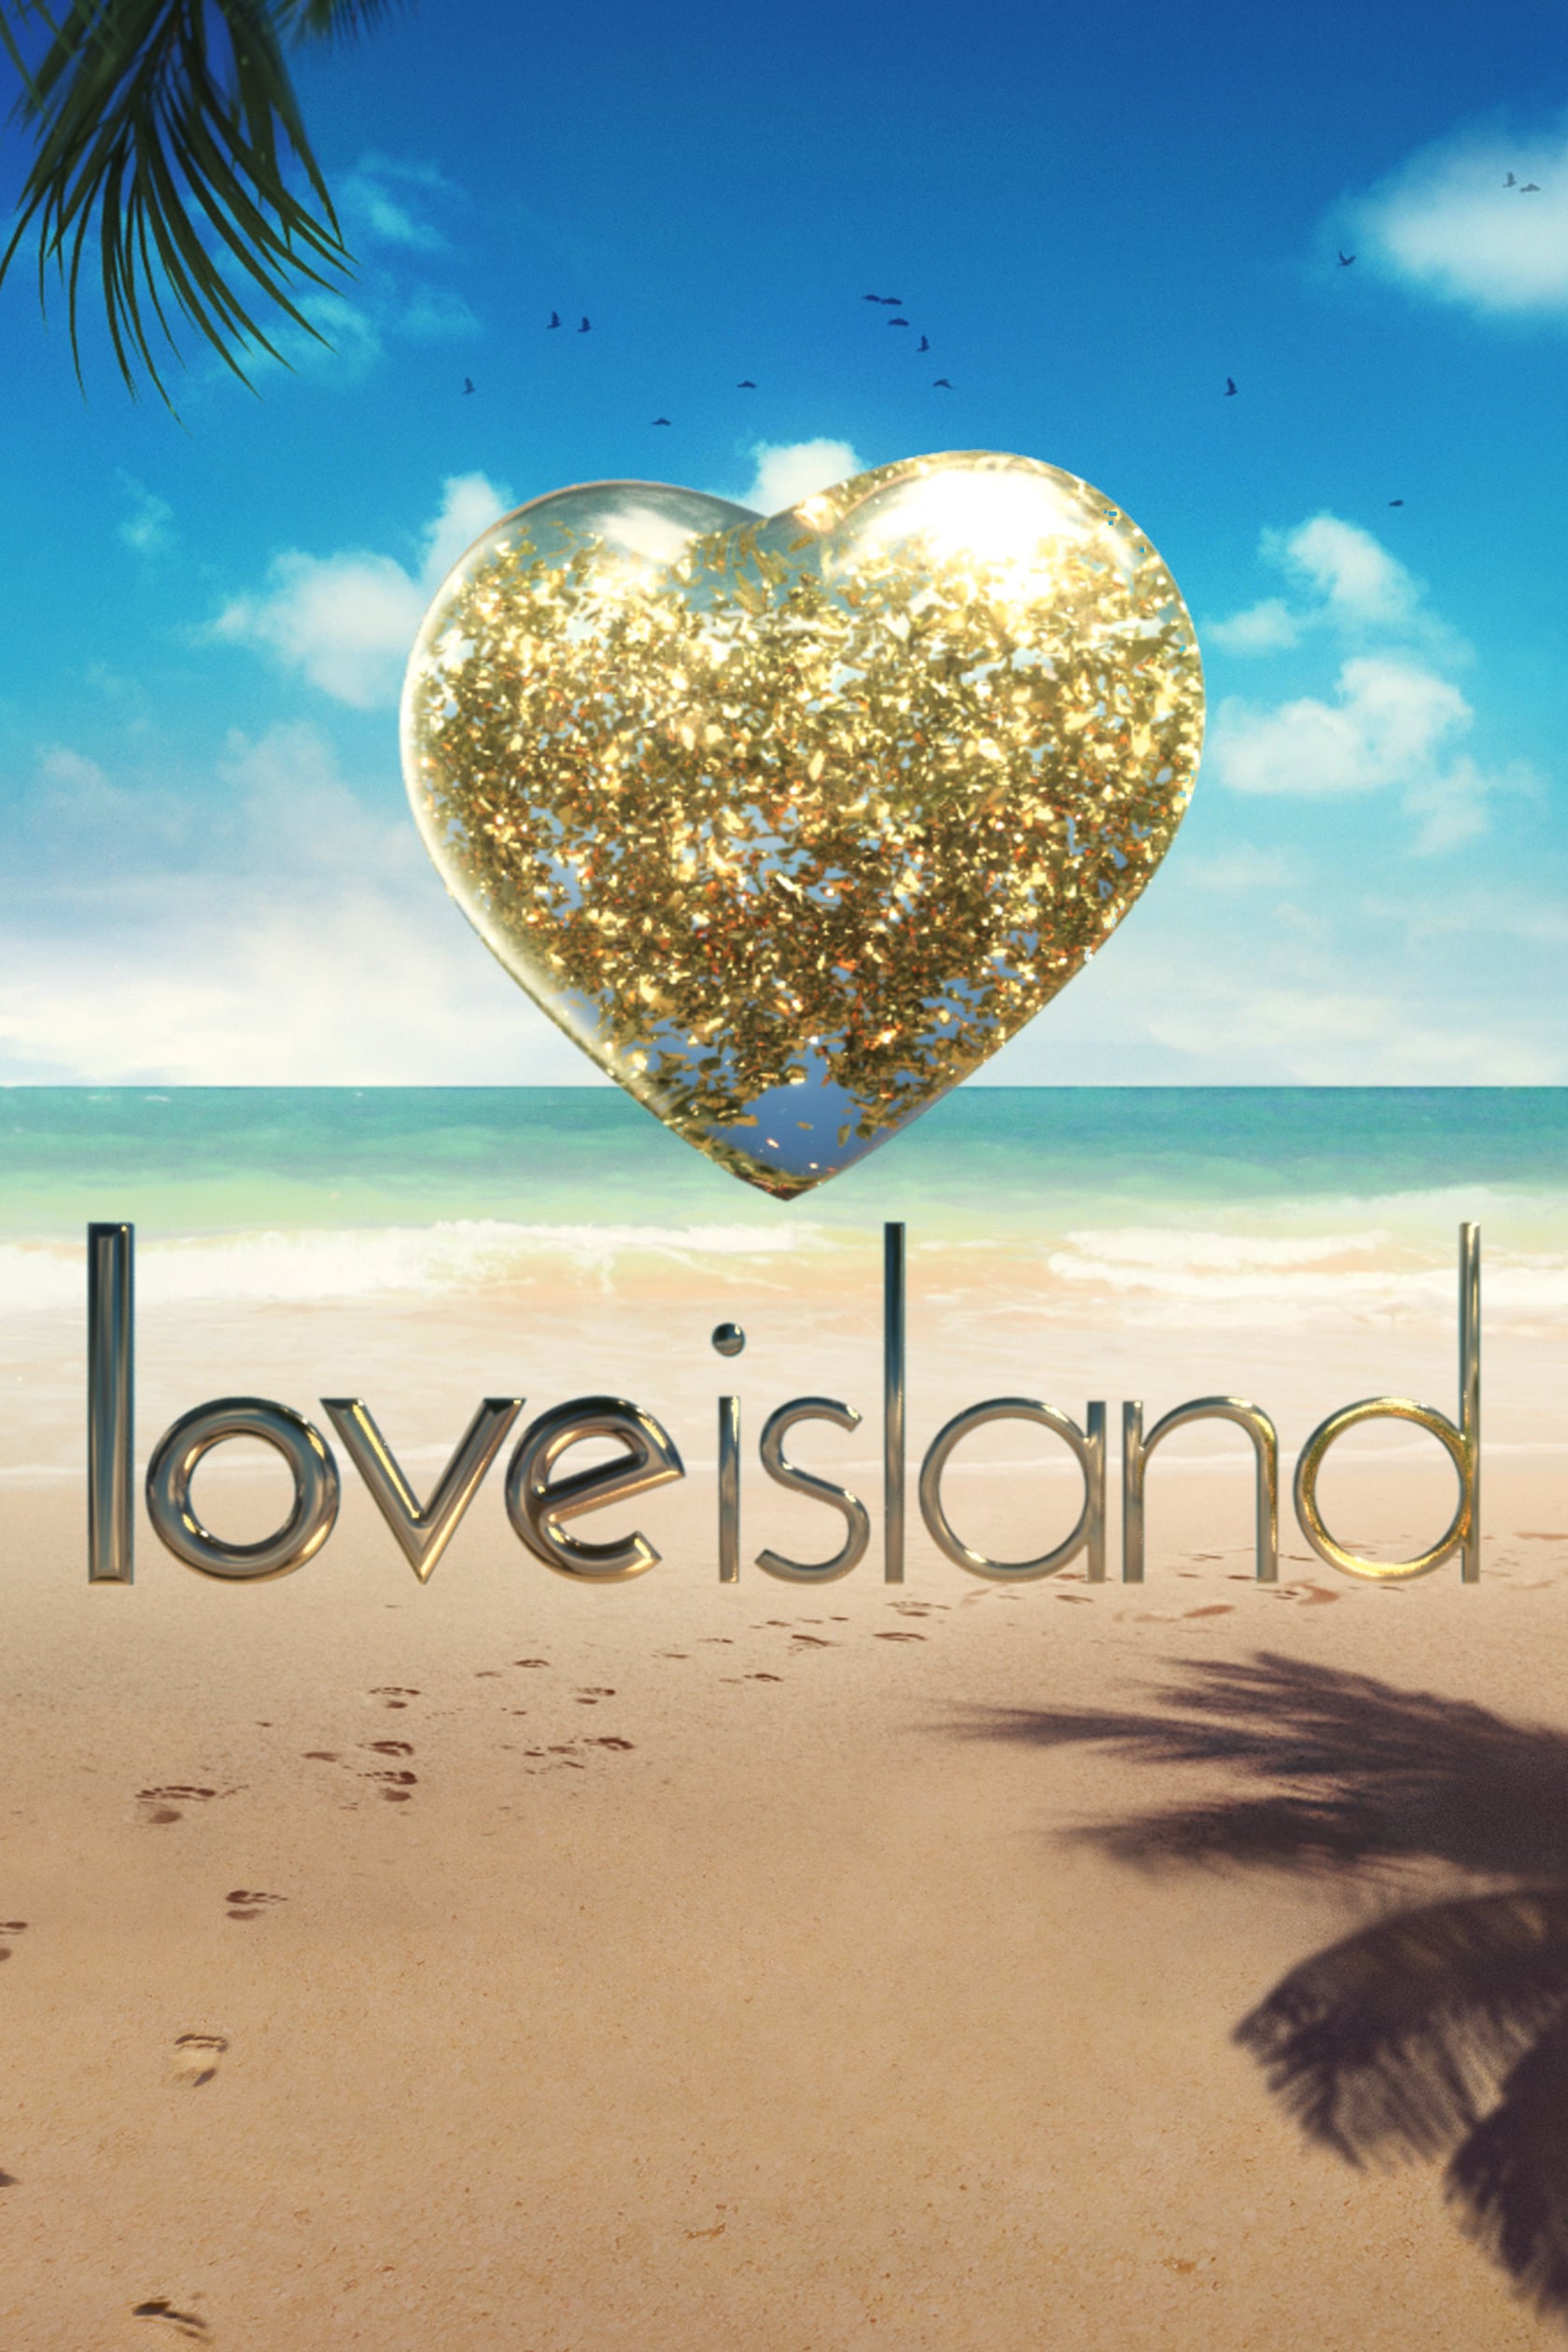 Love Island (2015) Picture Image Abyss